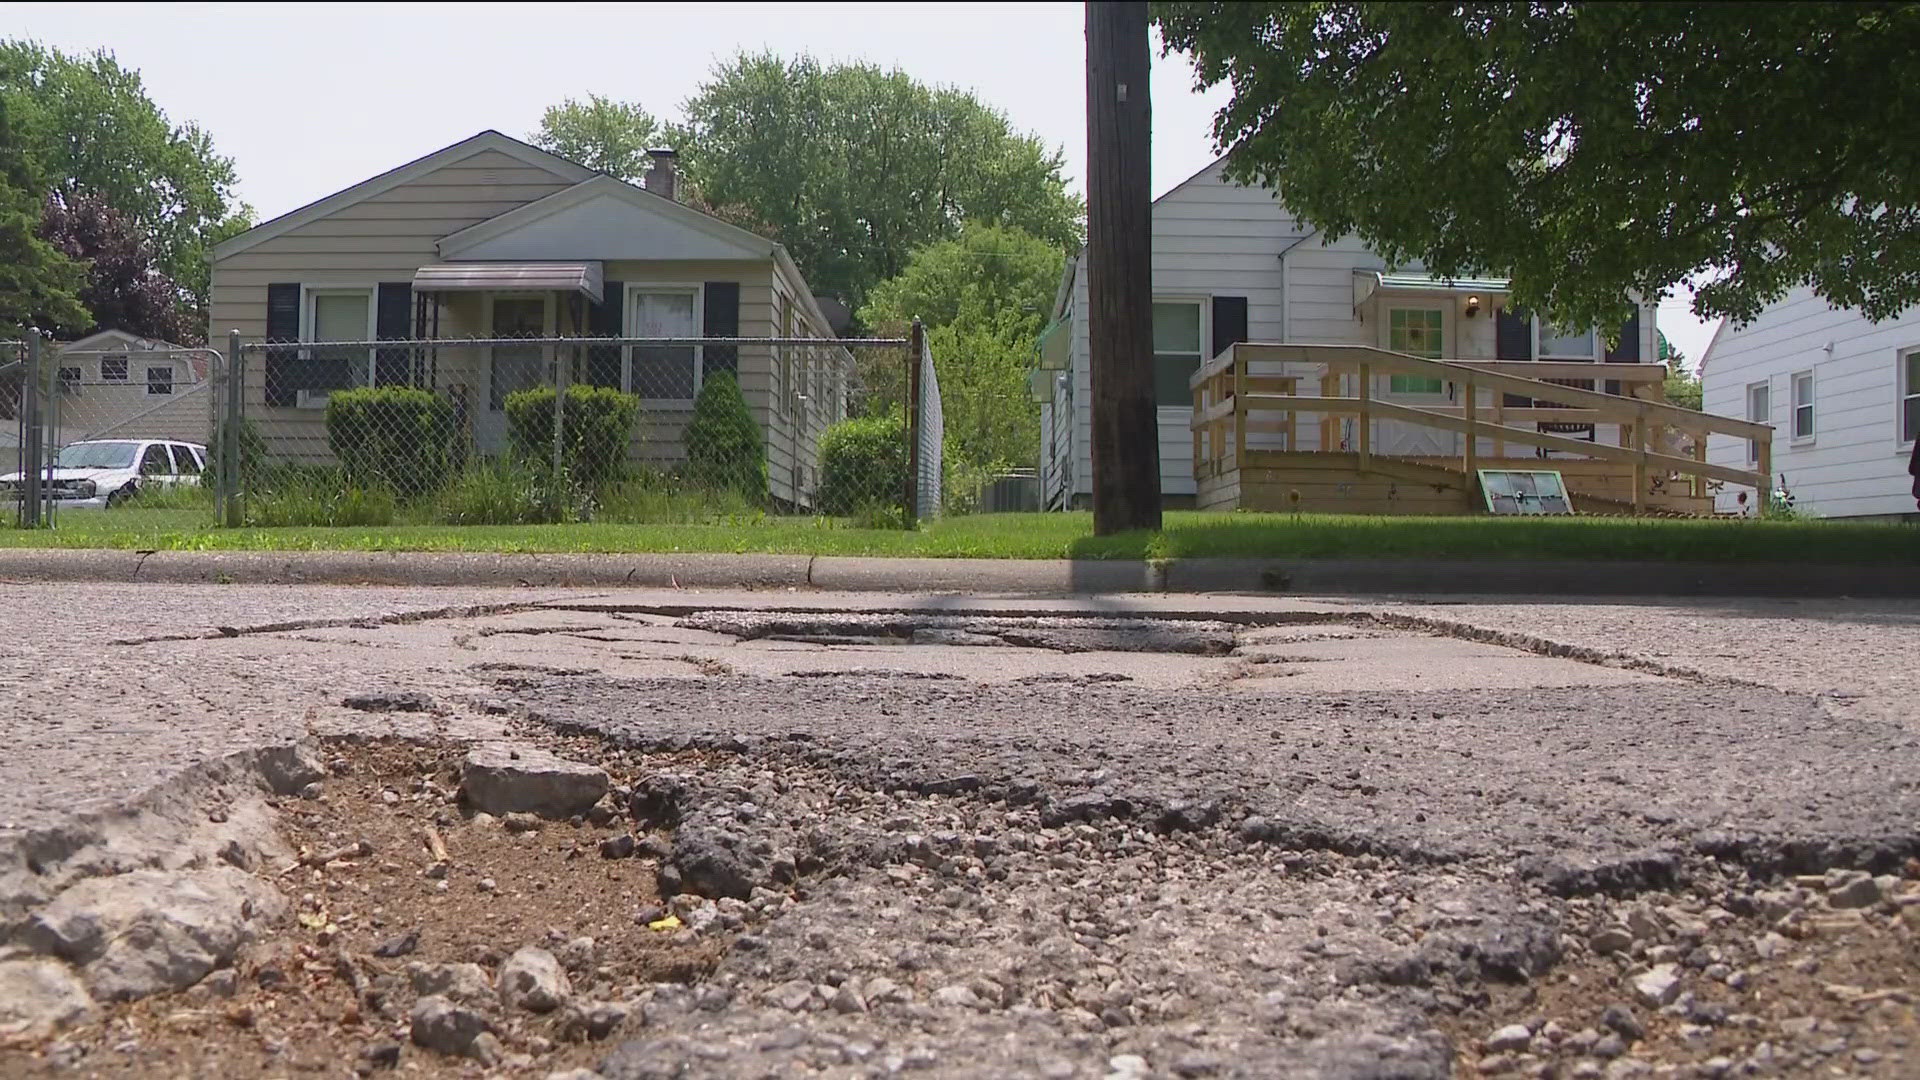 Cooler weather makes filling potholes more difficult, a city official says.